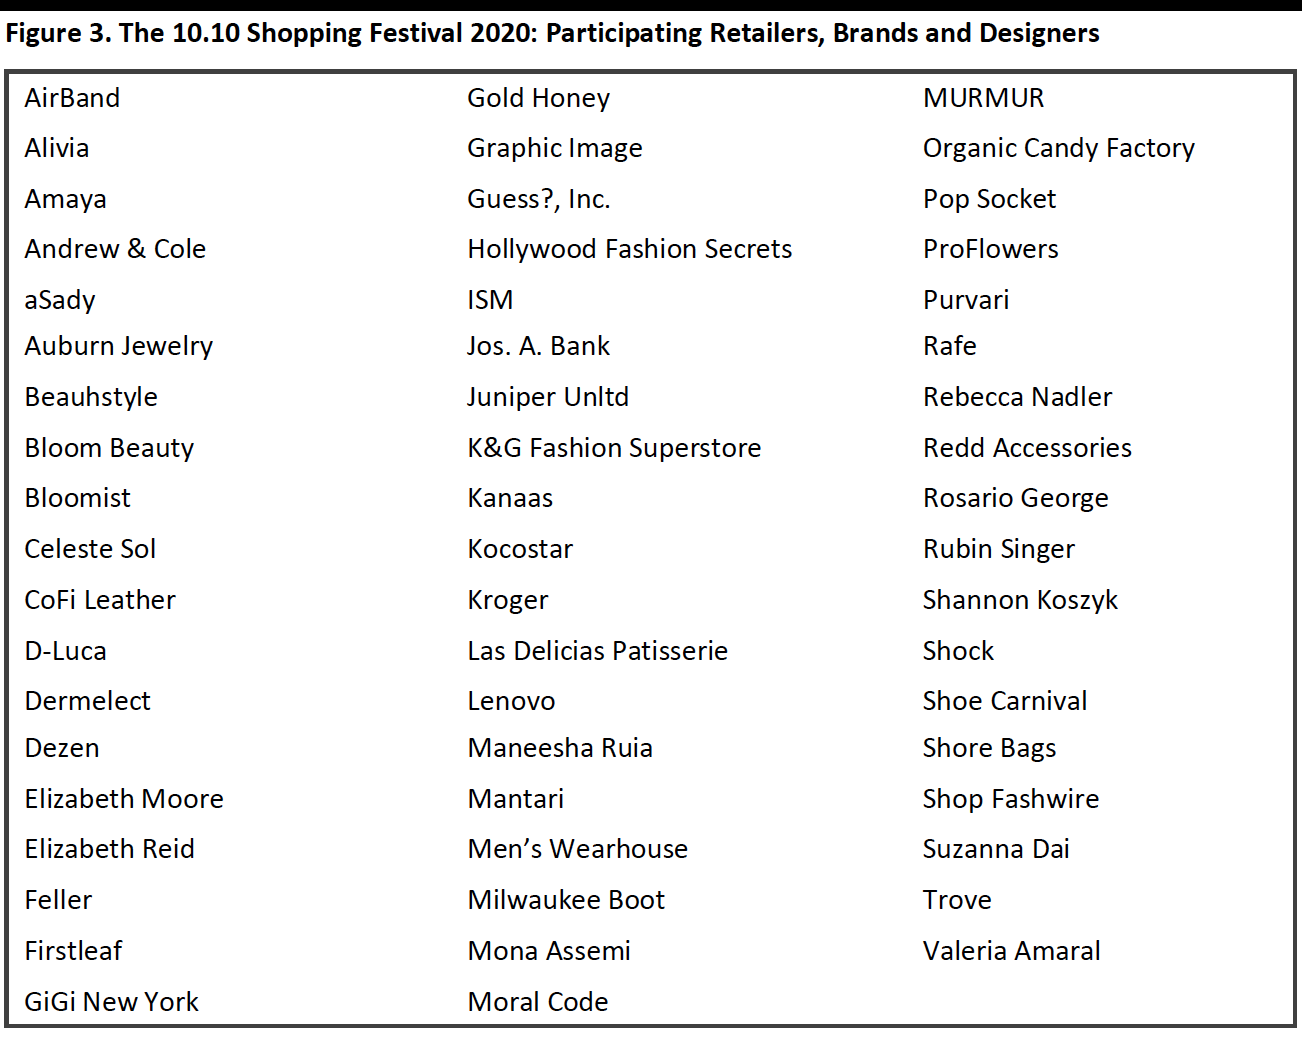 Figure 3. The 10.10 Shopping Festival 2020: Participating Retailers, Brands and Designers